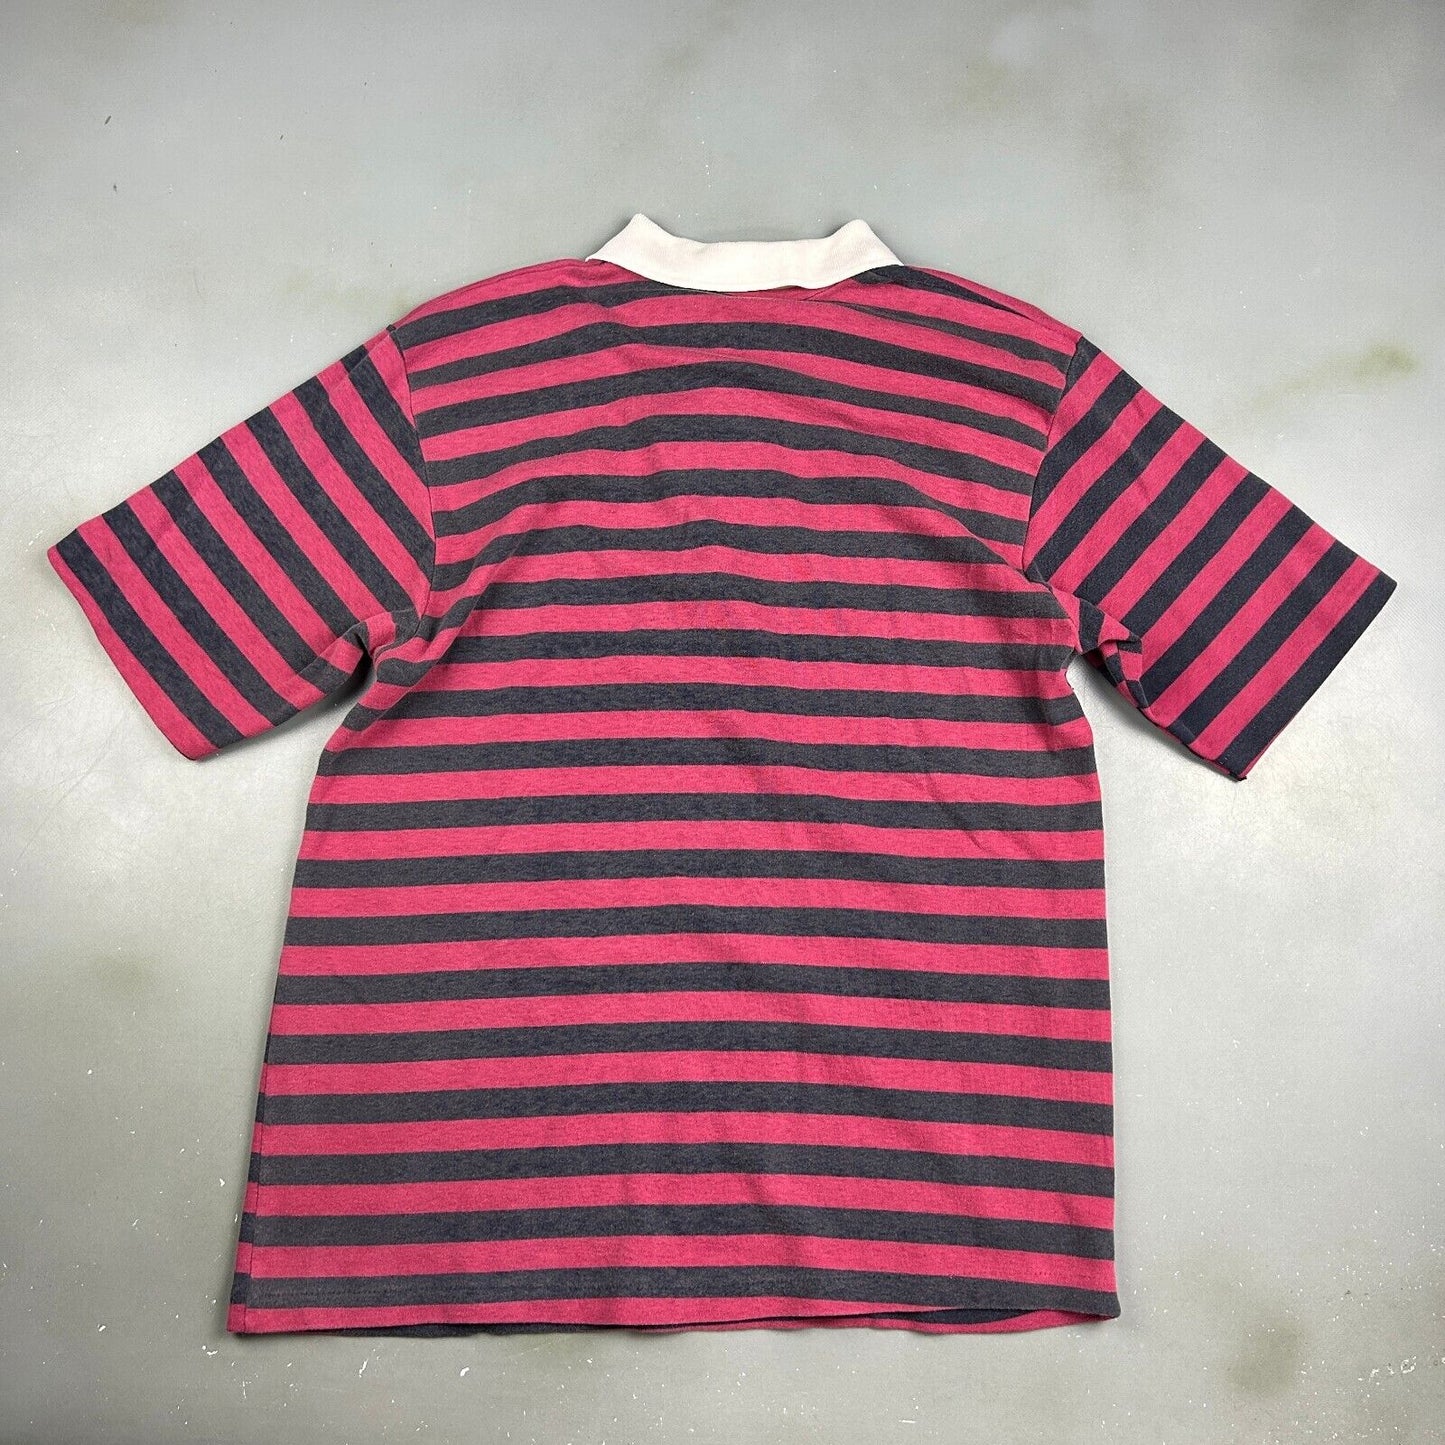 VINTAGE 90s On Stage Striped Polo Shirt sz M - L Adult